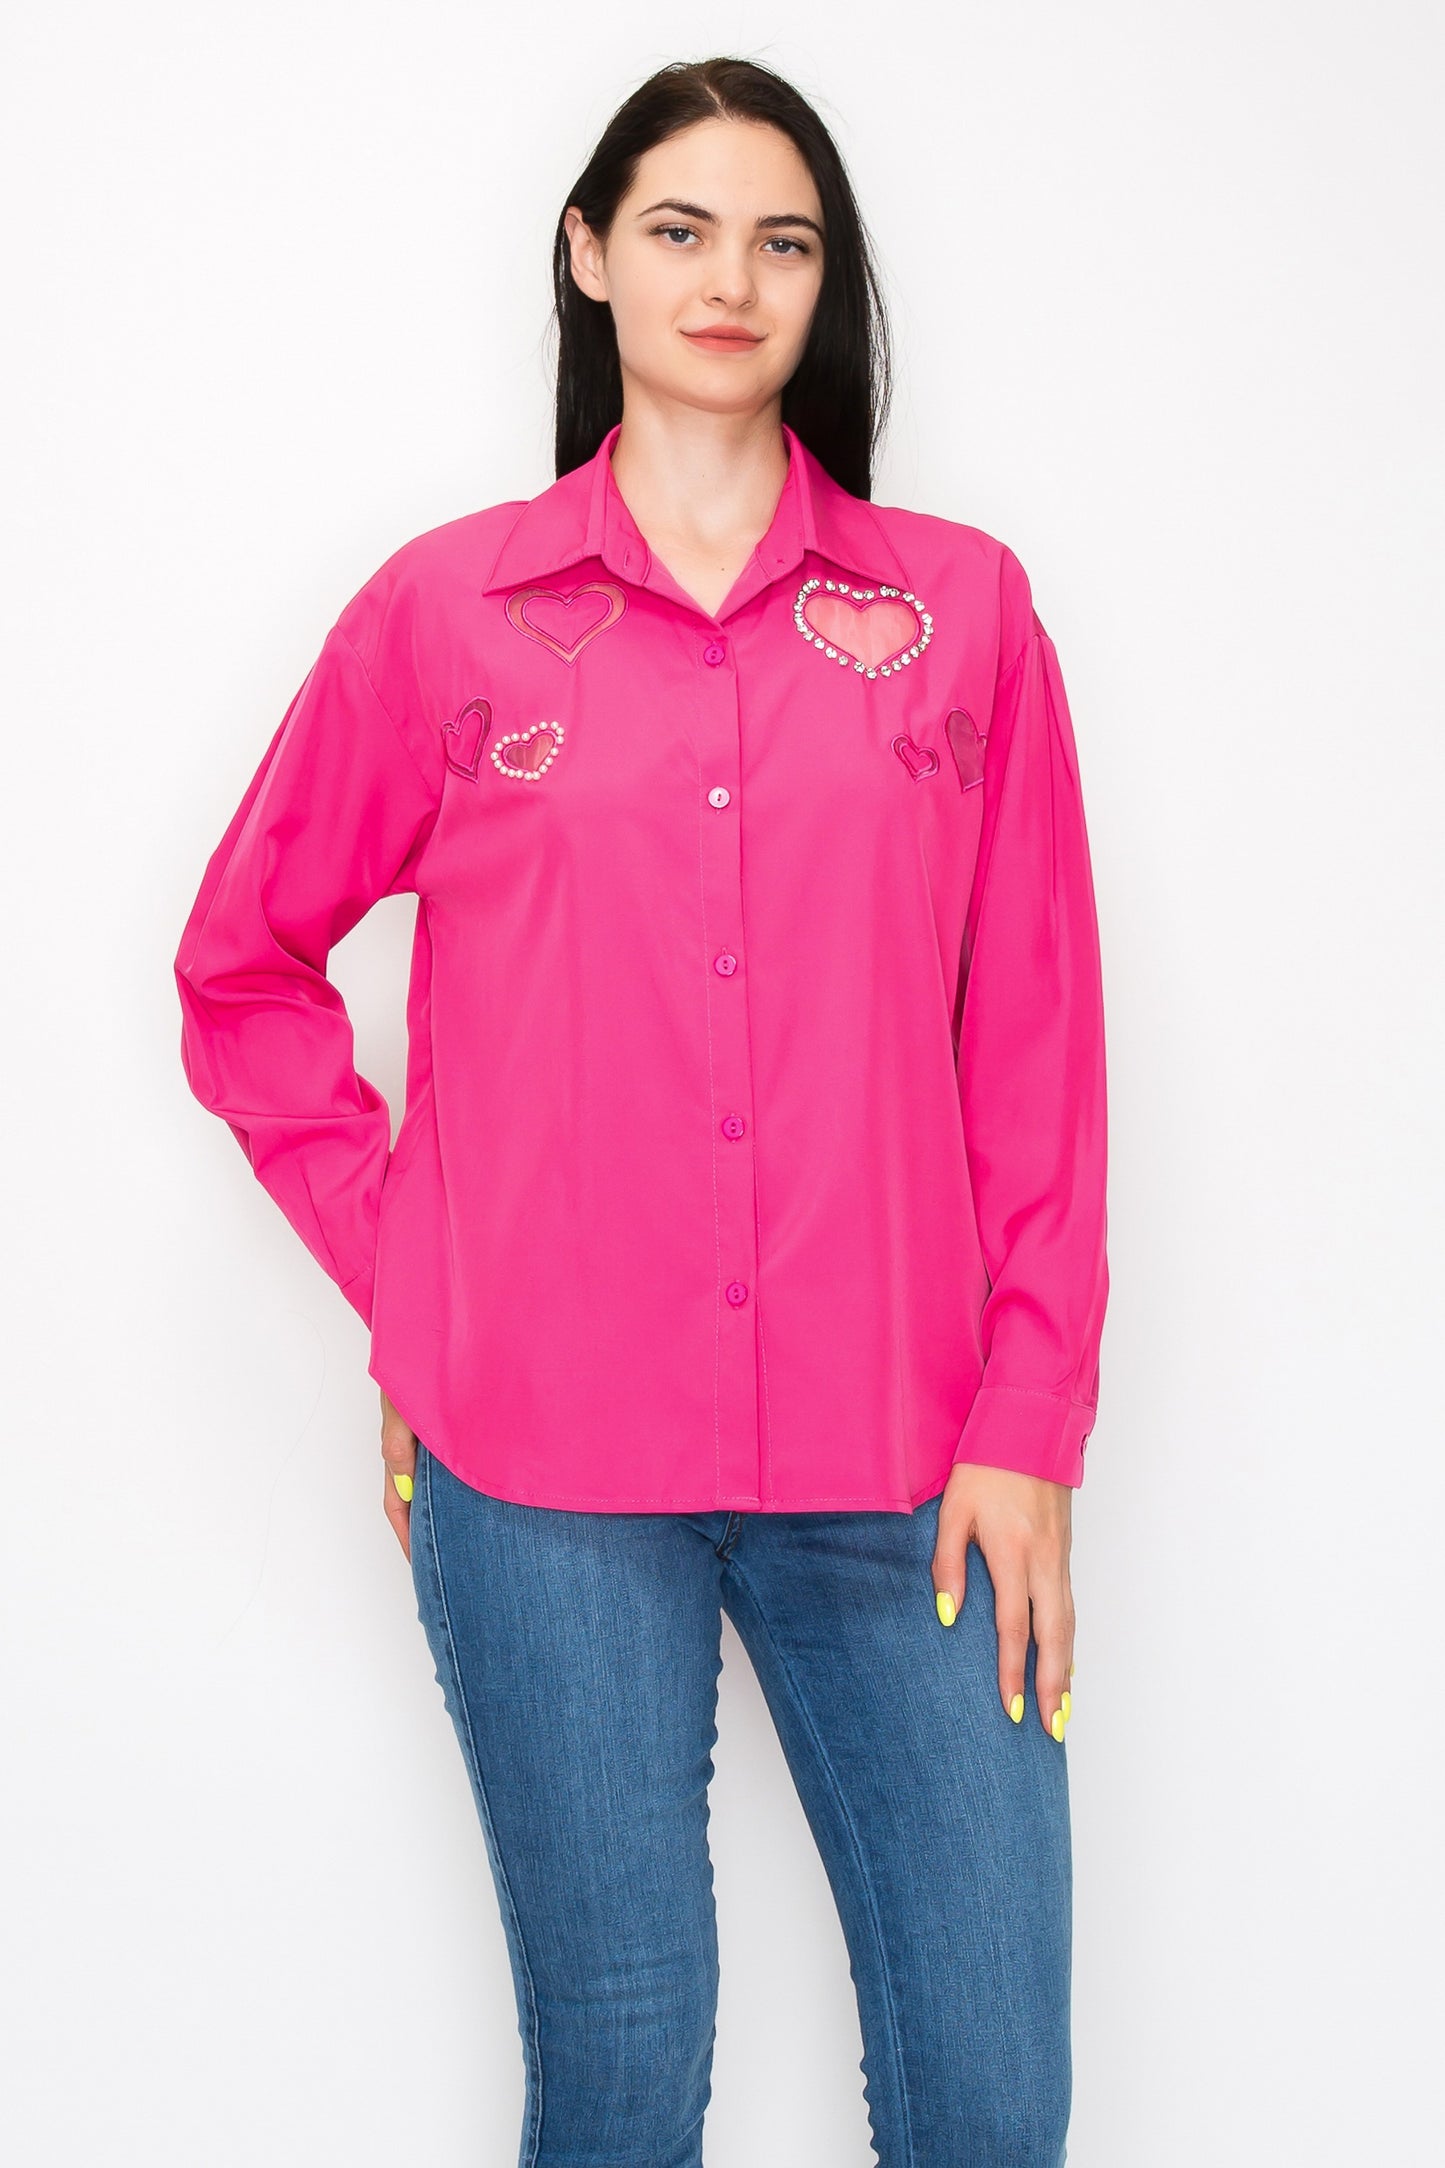 Queen Of Hearts Embellished Shirt